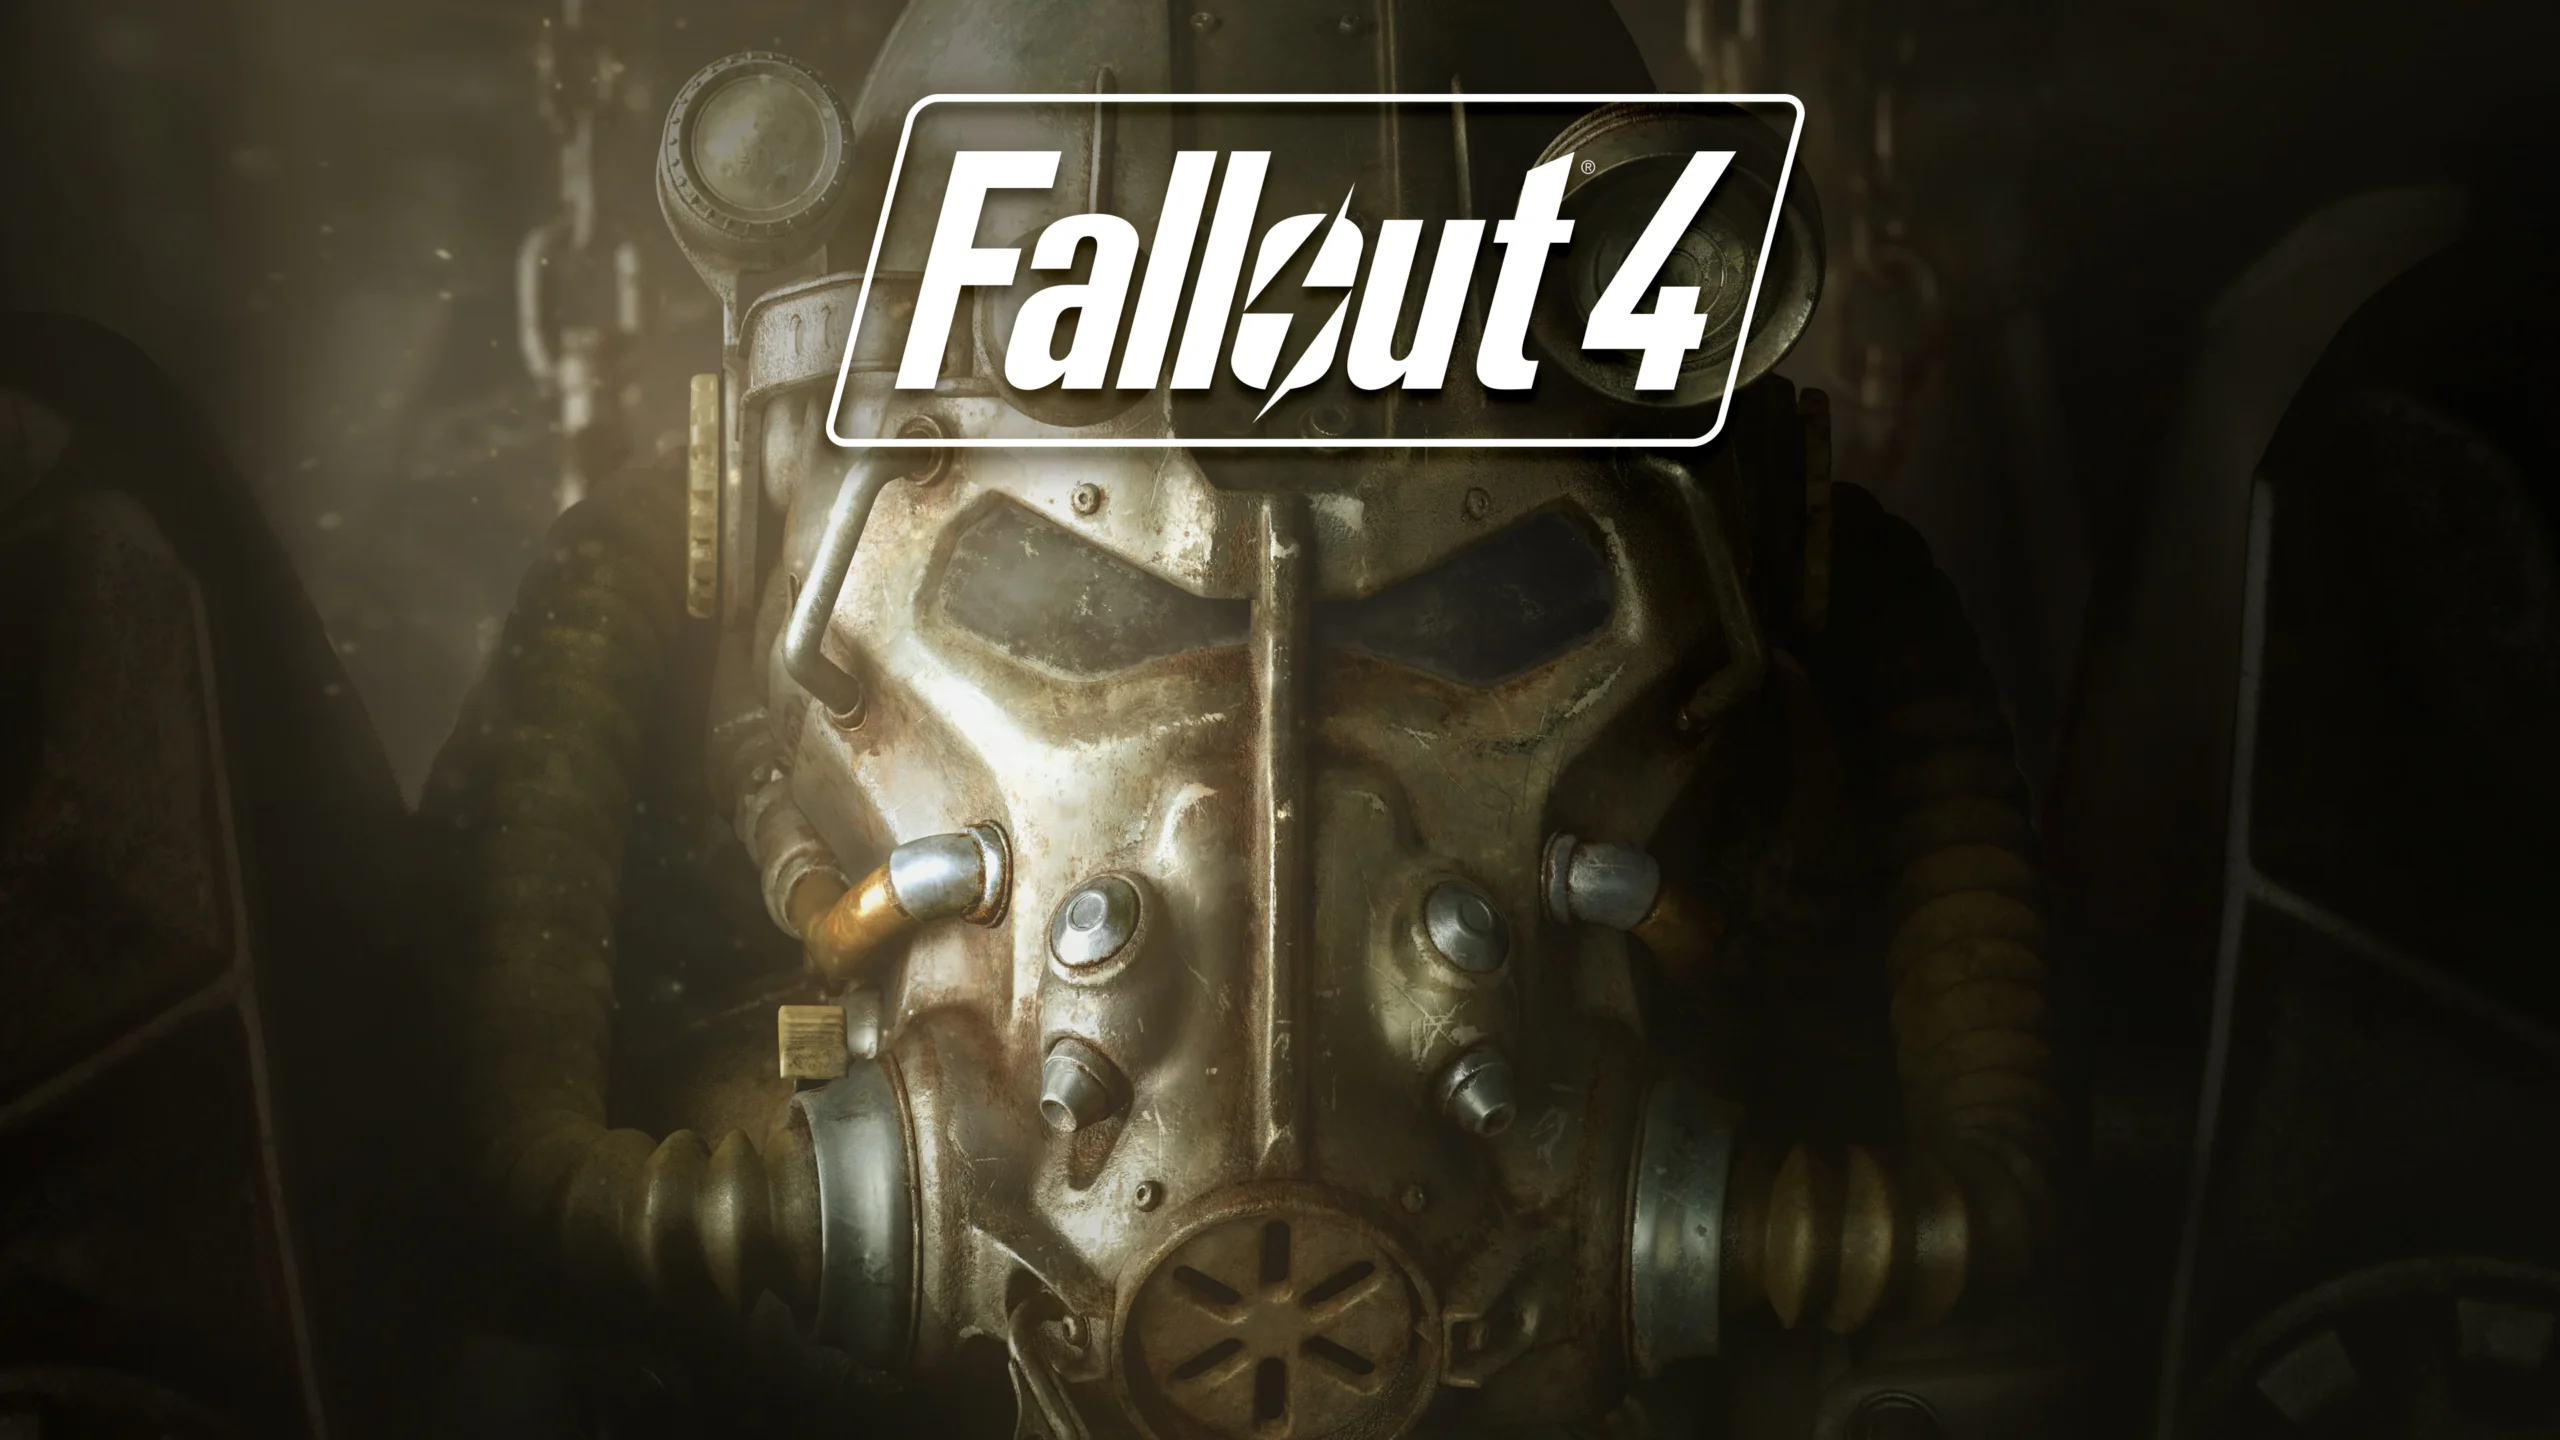 The Ultimate Fallout 4 Cheat Guide: Console Commands and Cheats Unveiled